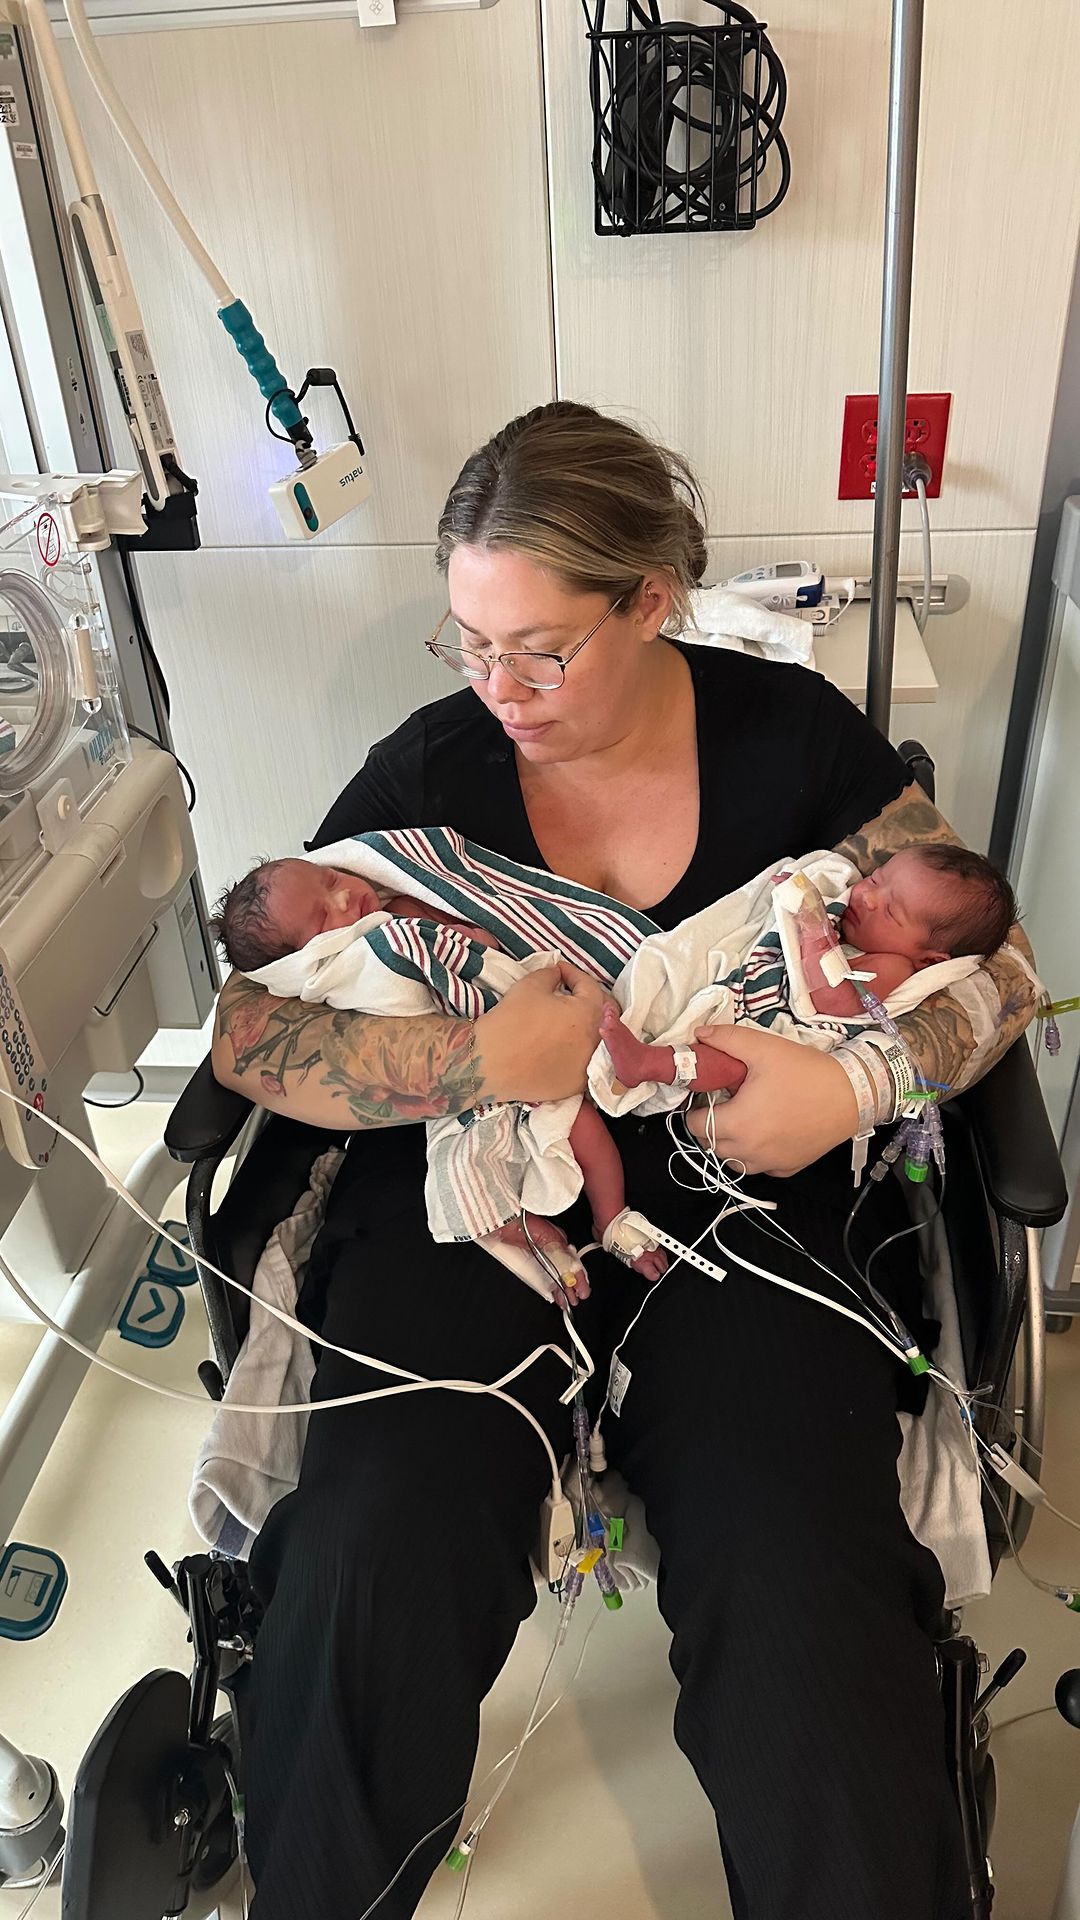 Kailyn gave birth to twins - a boy and a girl - in November